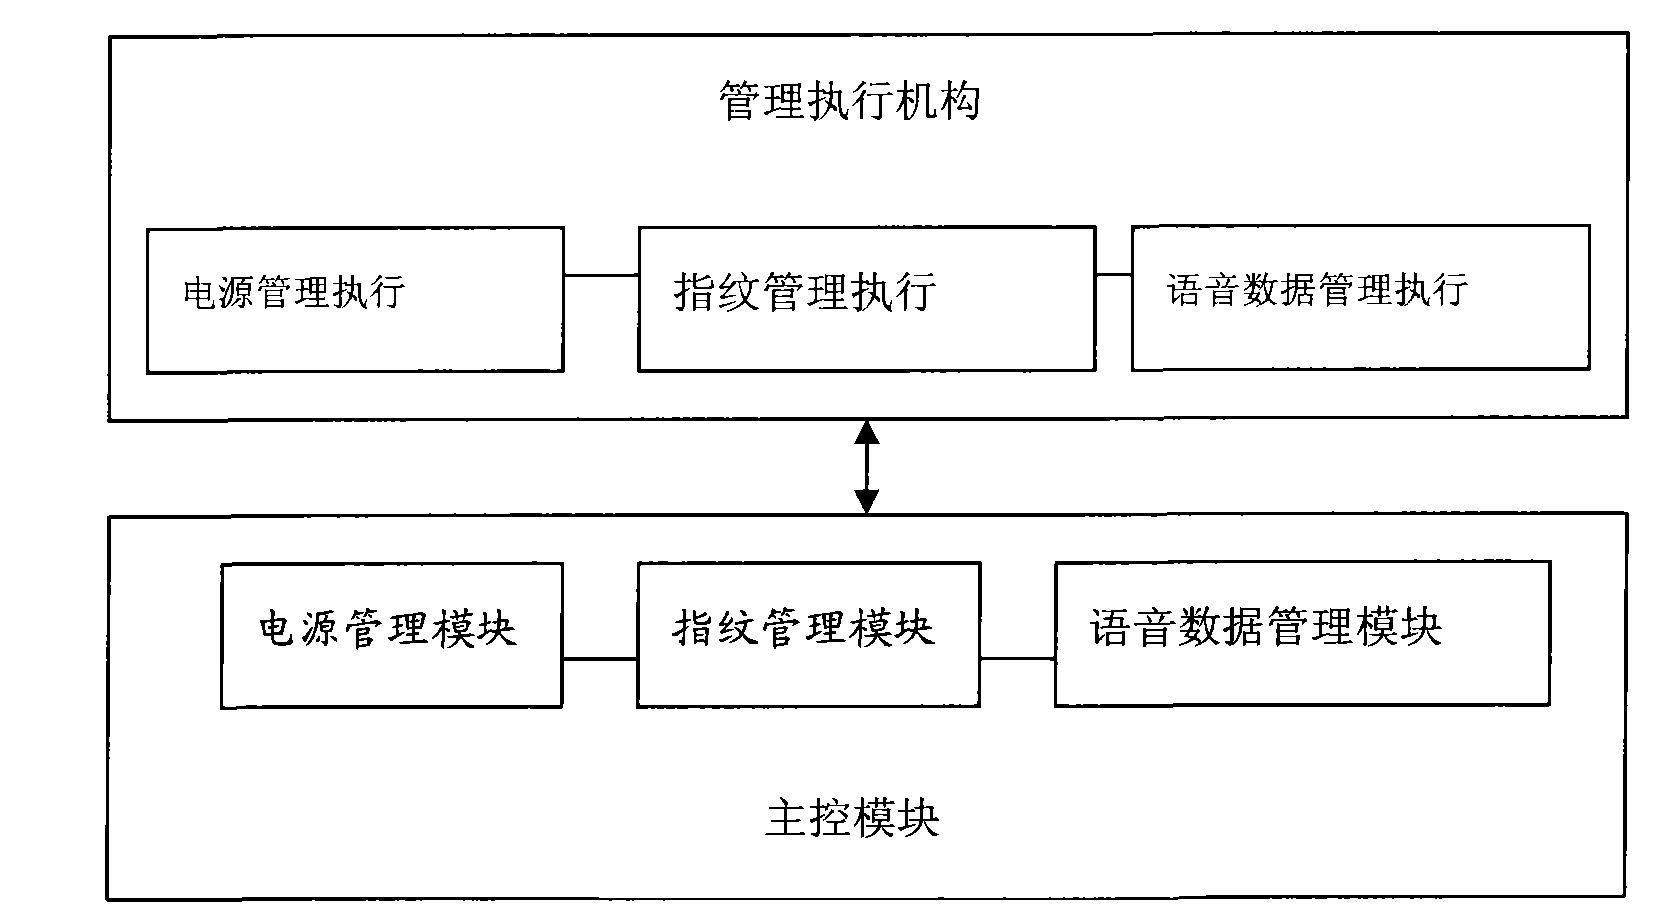 Personal code group manager and management system thereof